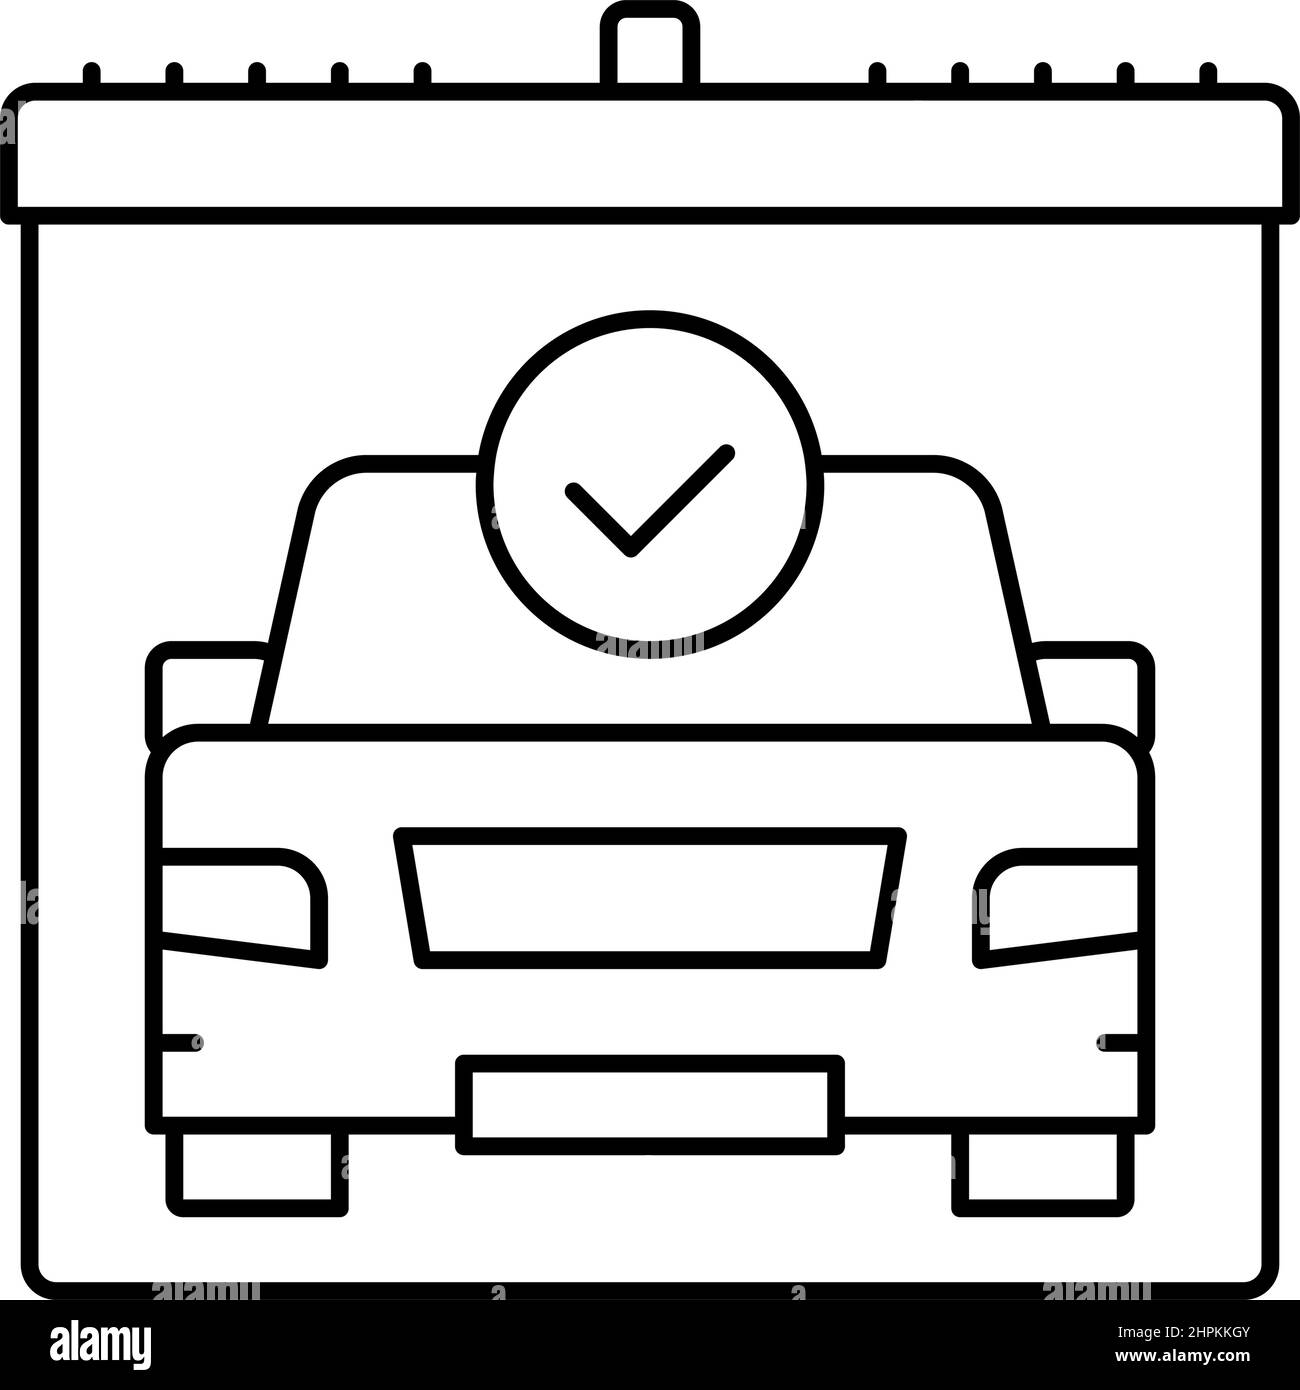 drivers day of test line icon vector illustration Stock Vector